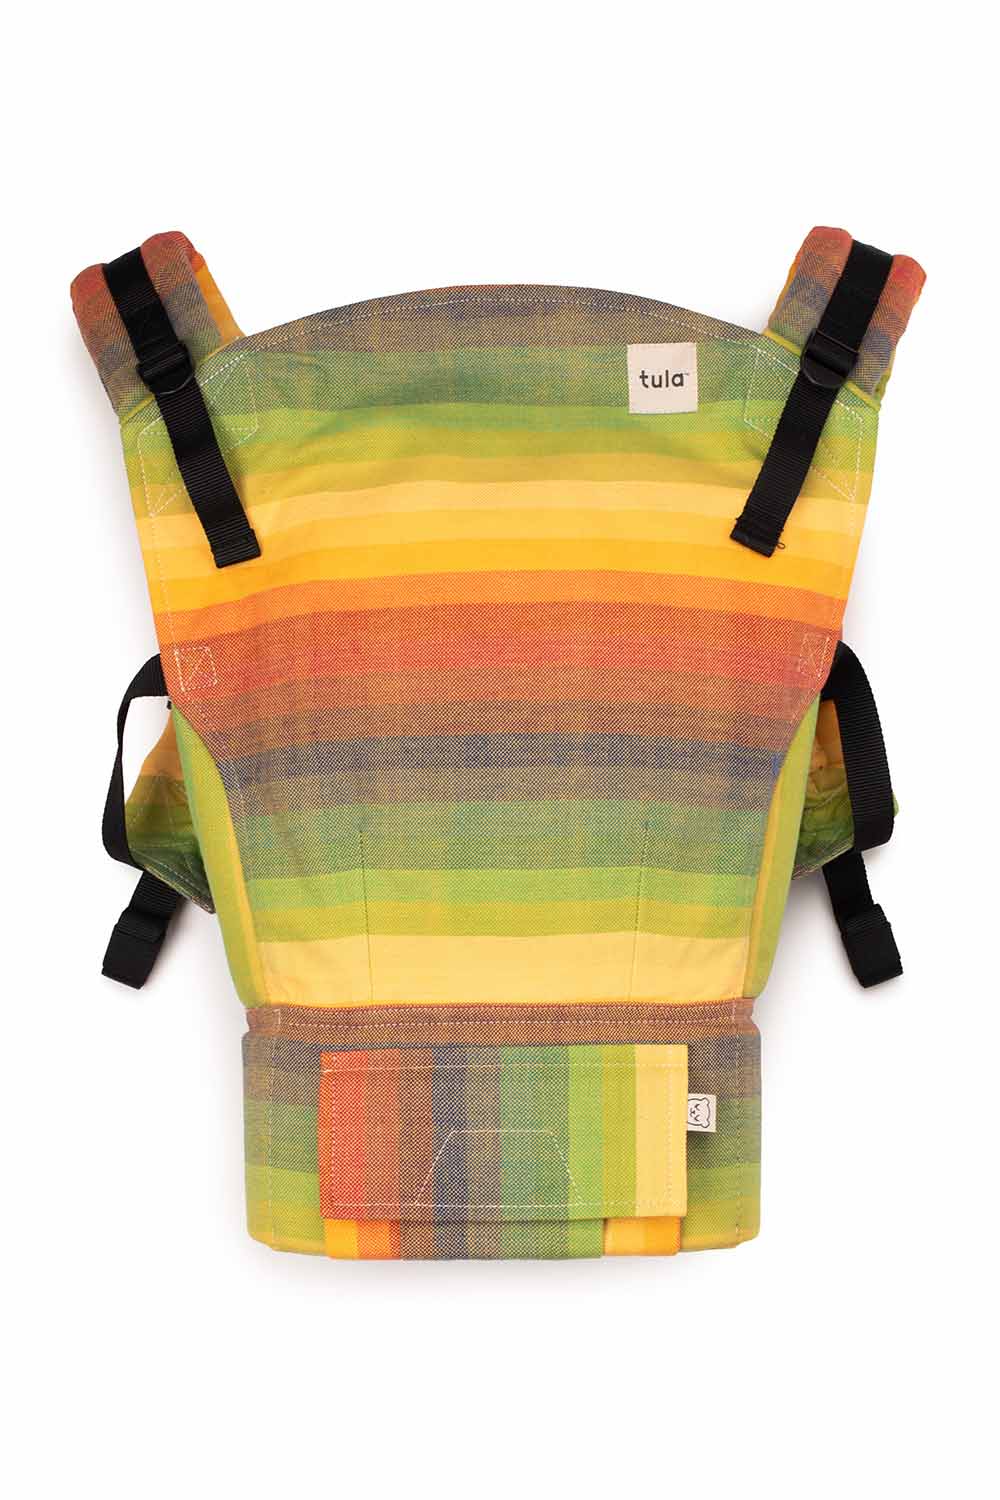 I Missed You - Signature Handwoven Standard Baby Carrier